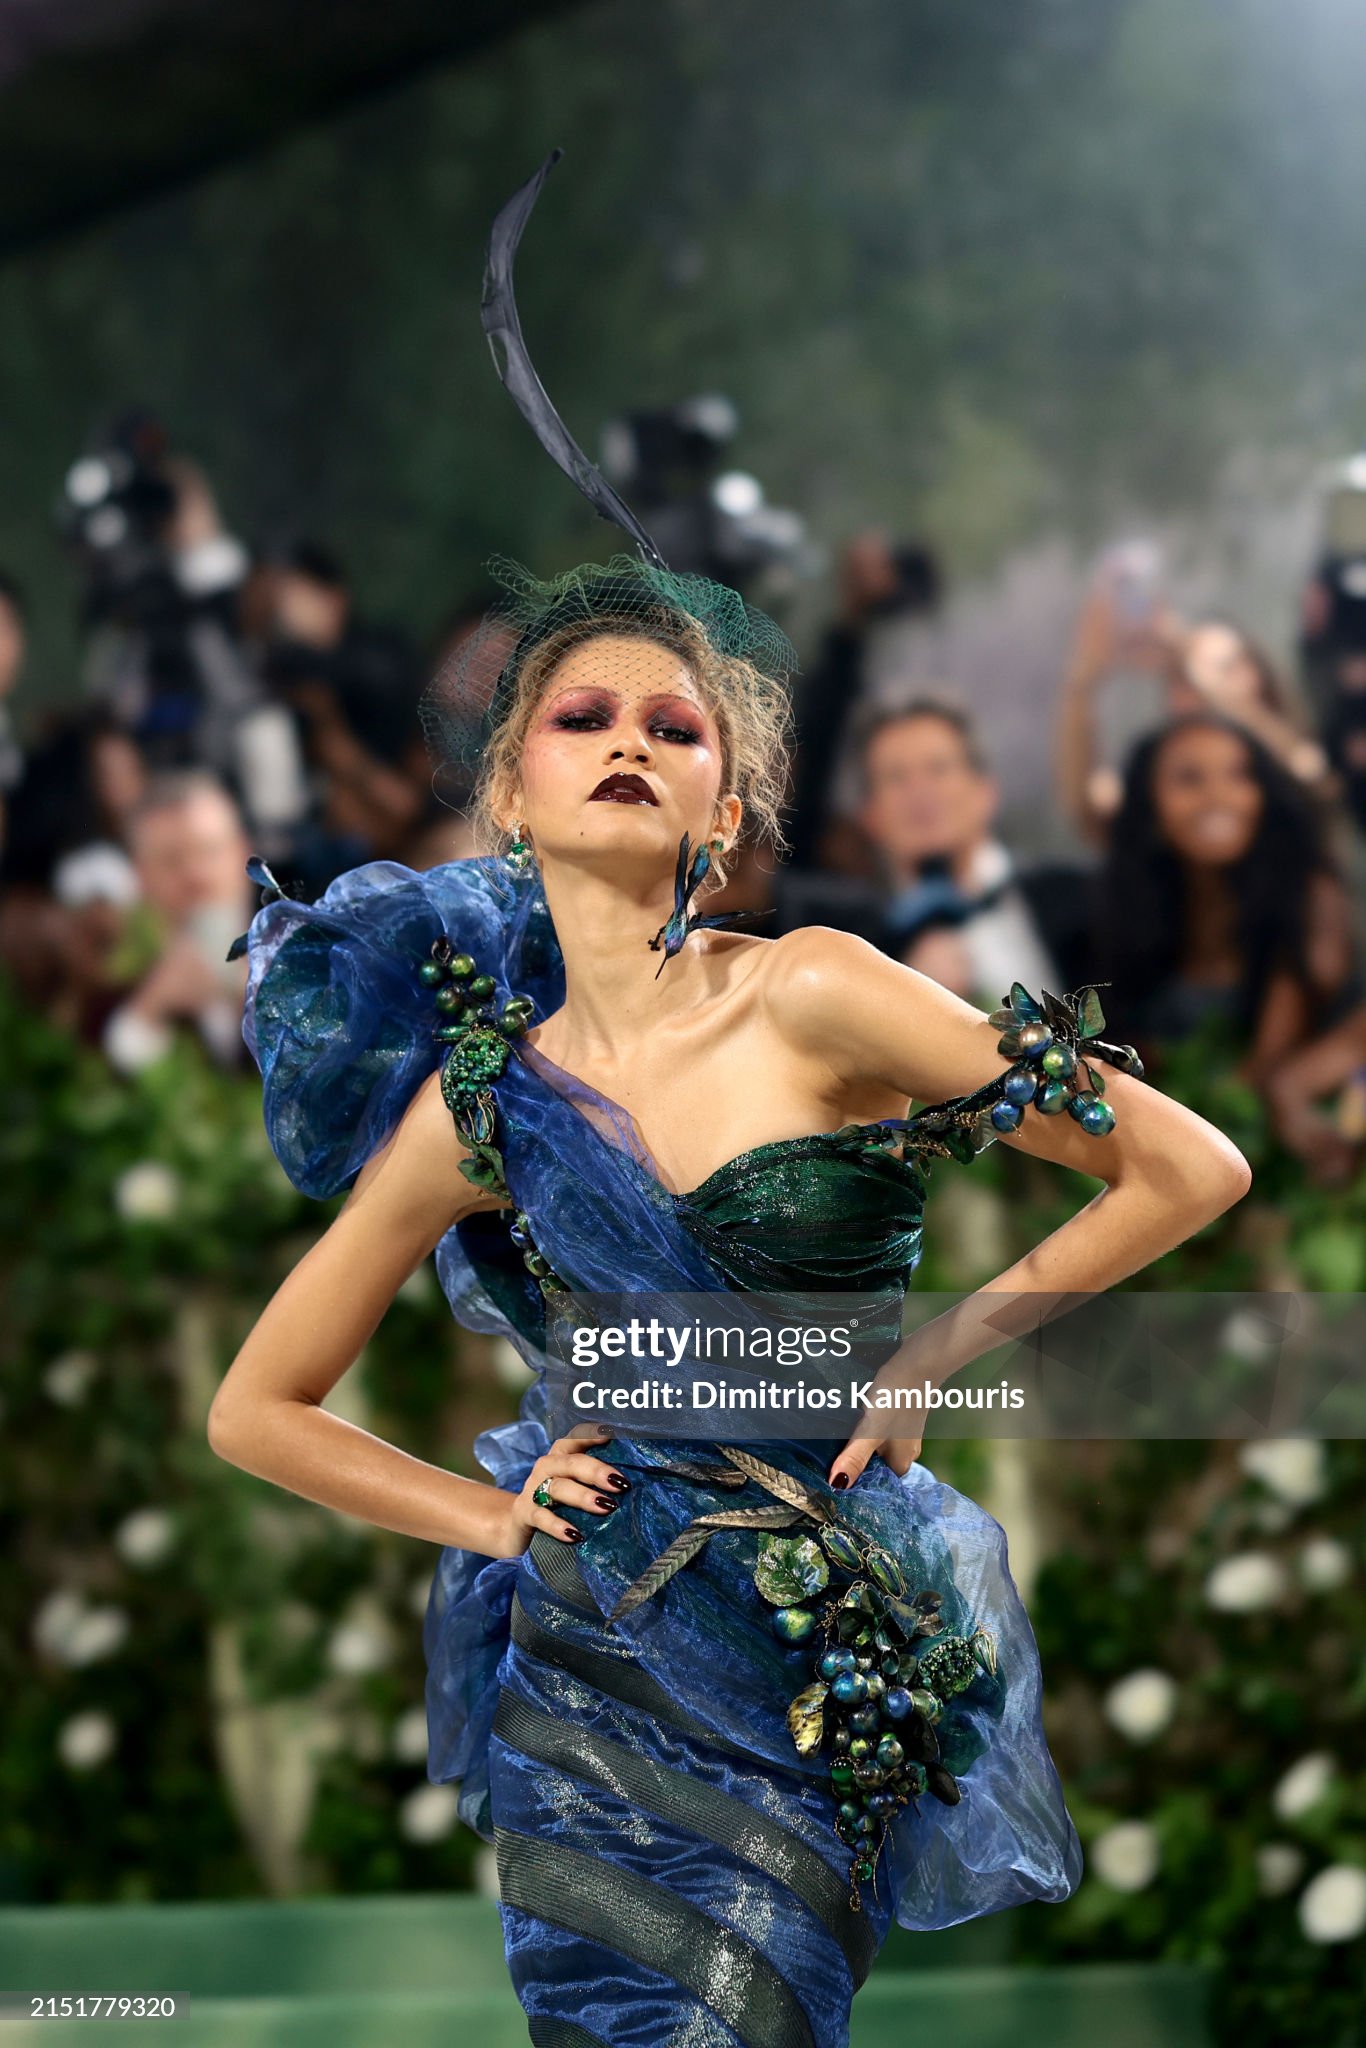 gettyimages-2151779320-2048x2048.jpg